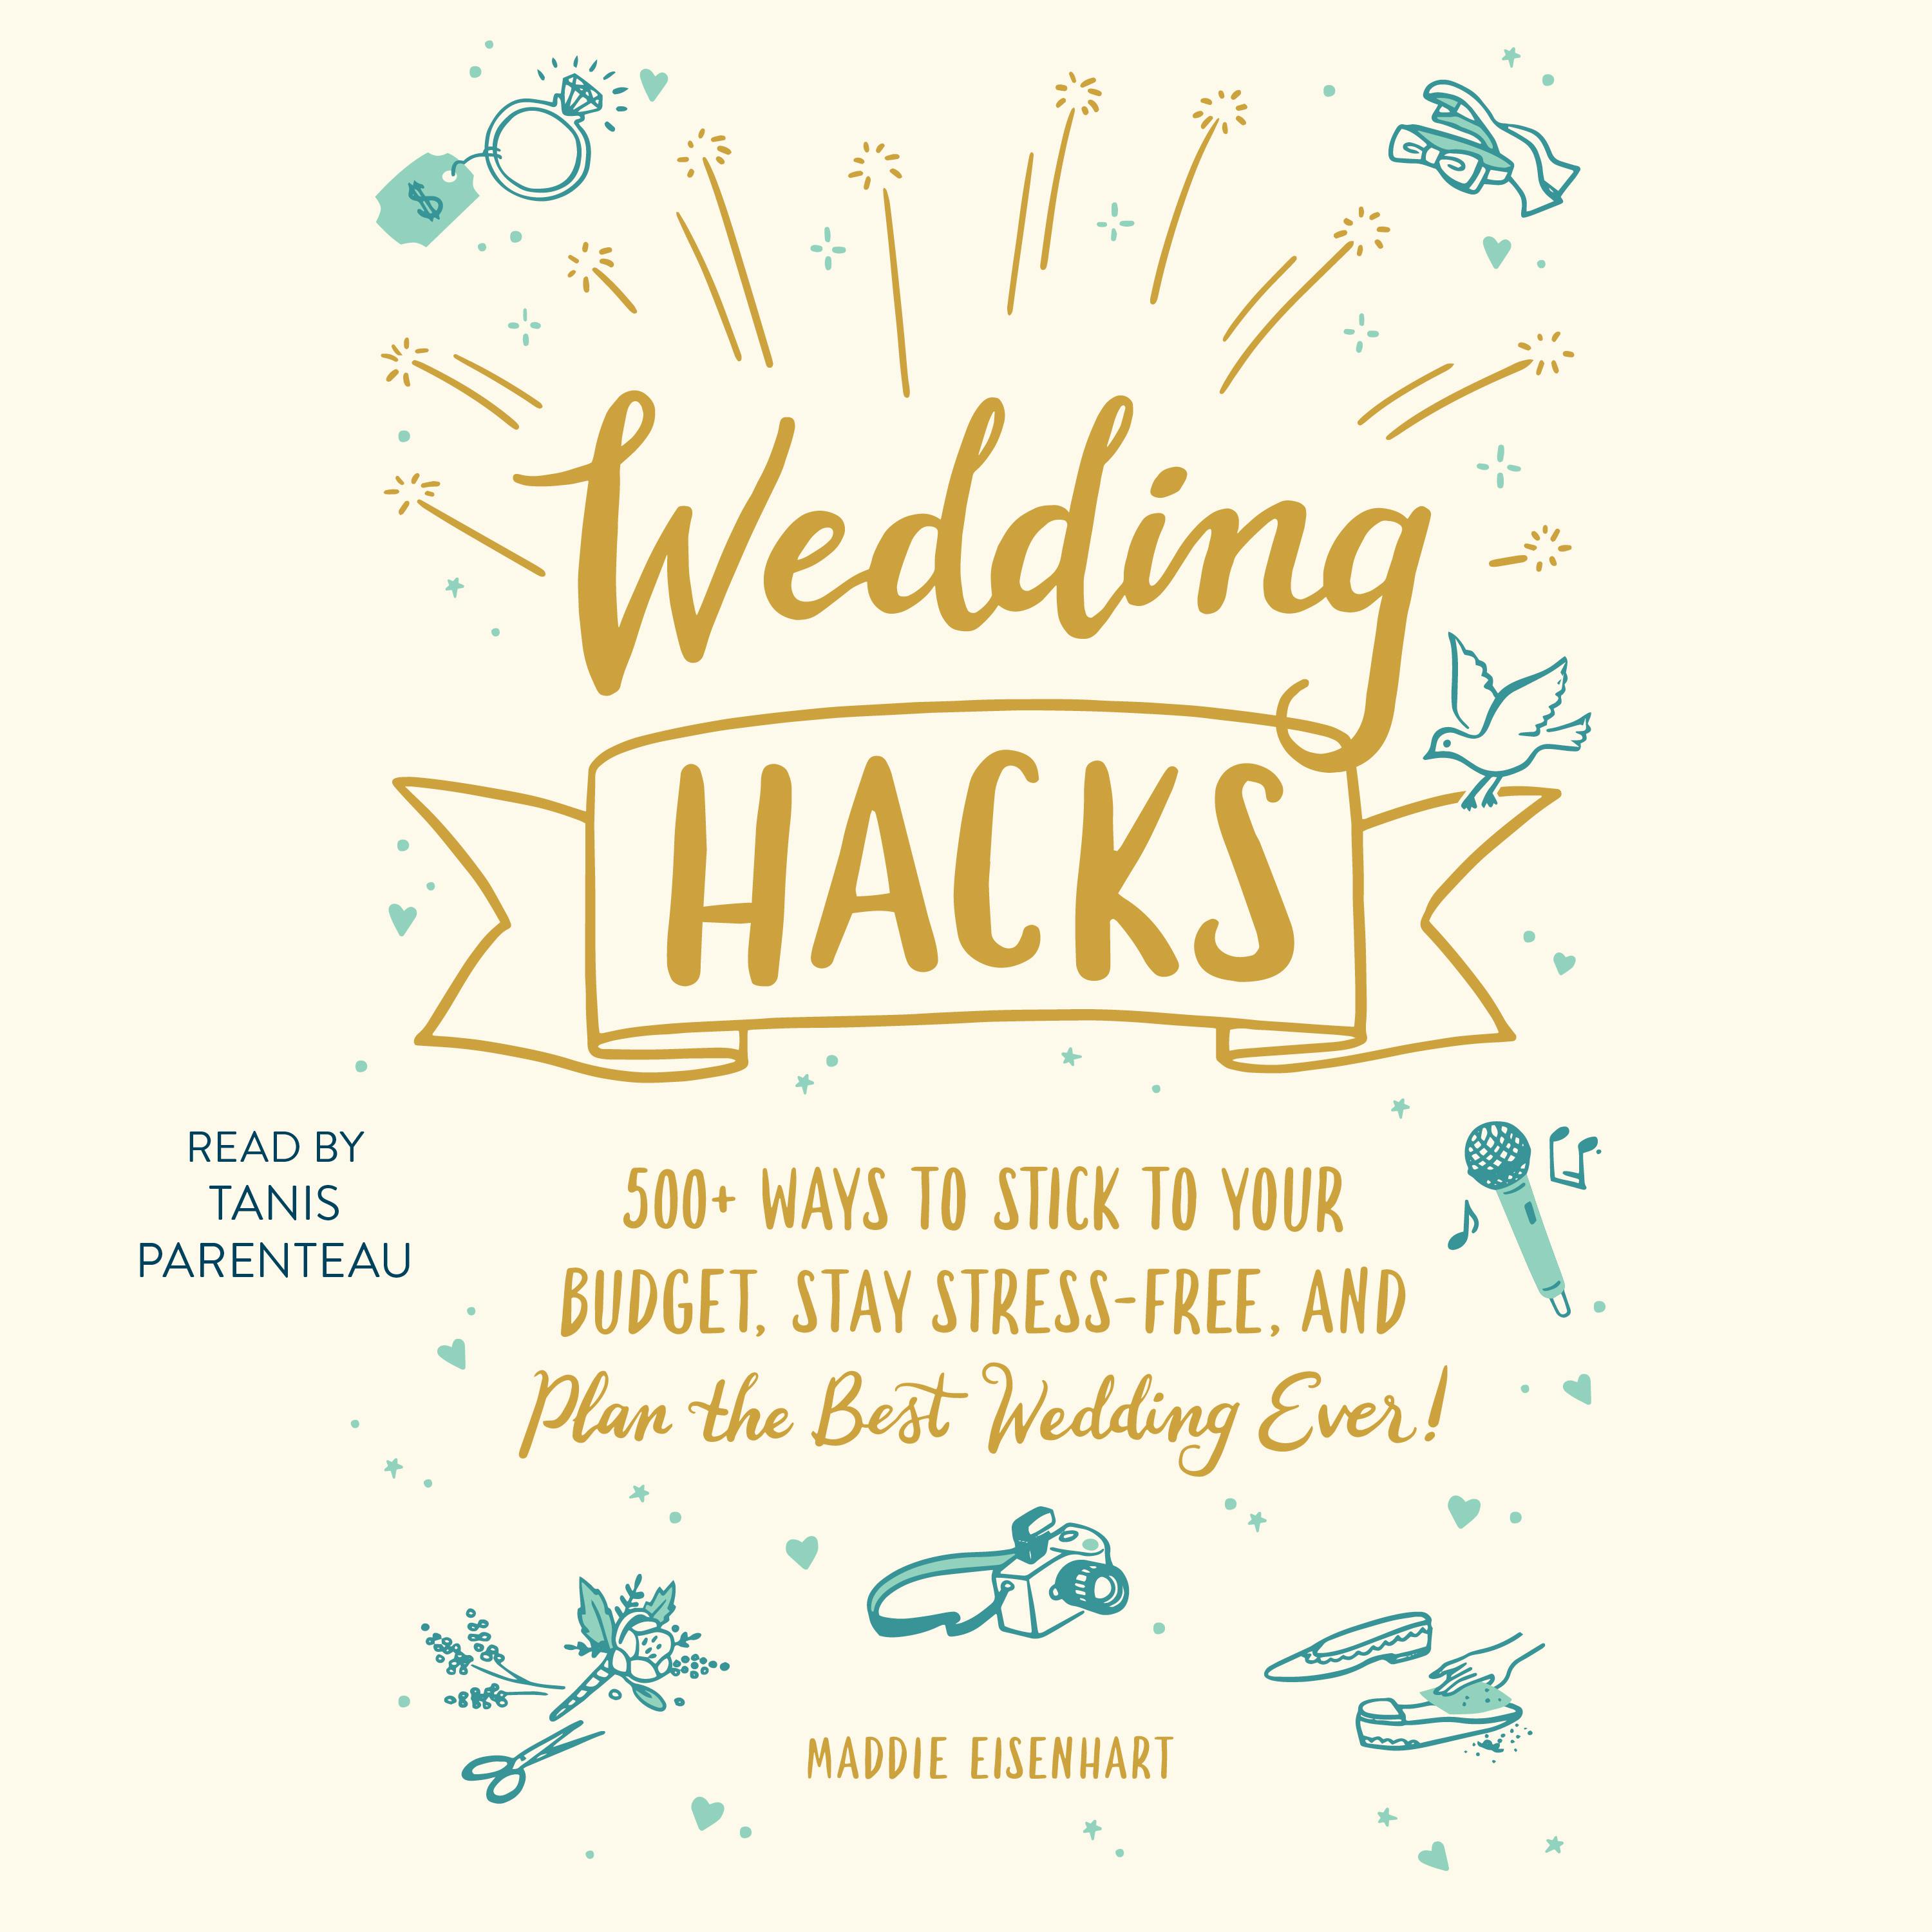 Wedding Hacks: 500+ Ways to Stick to Your Budget, Stay Stress-Free, and Plan the Best Wedding Ever! - undefined